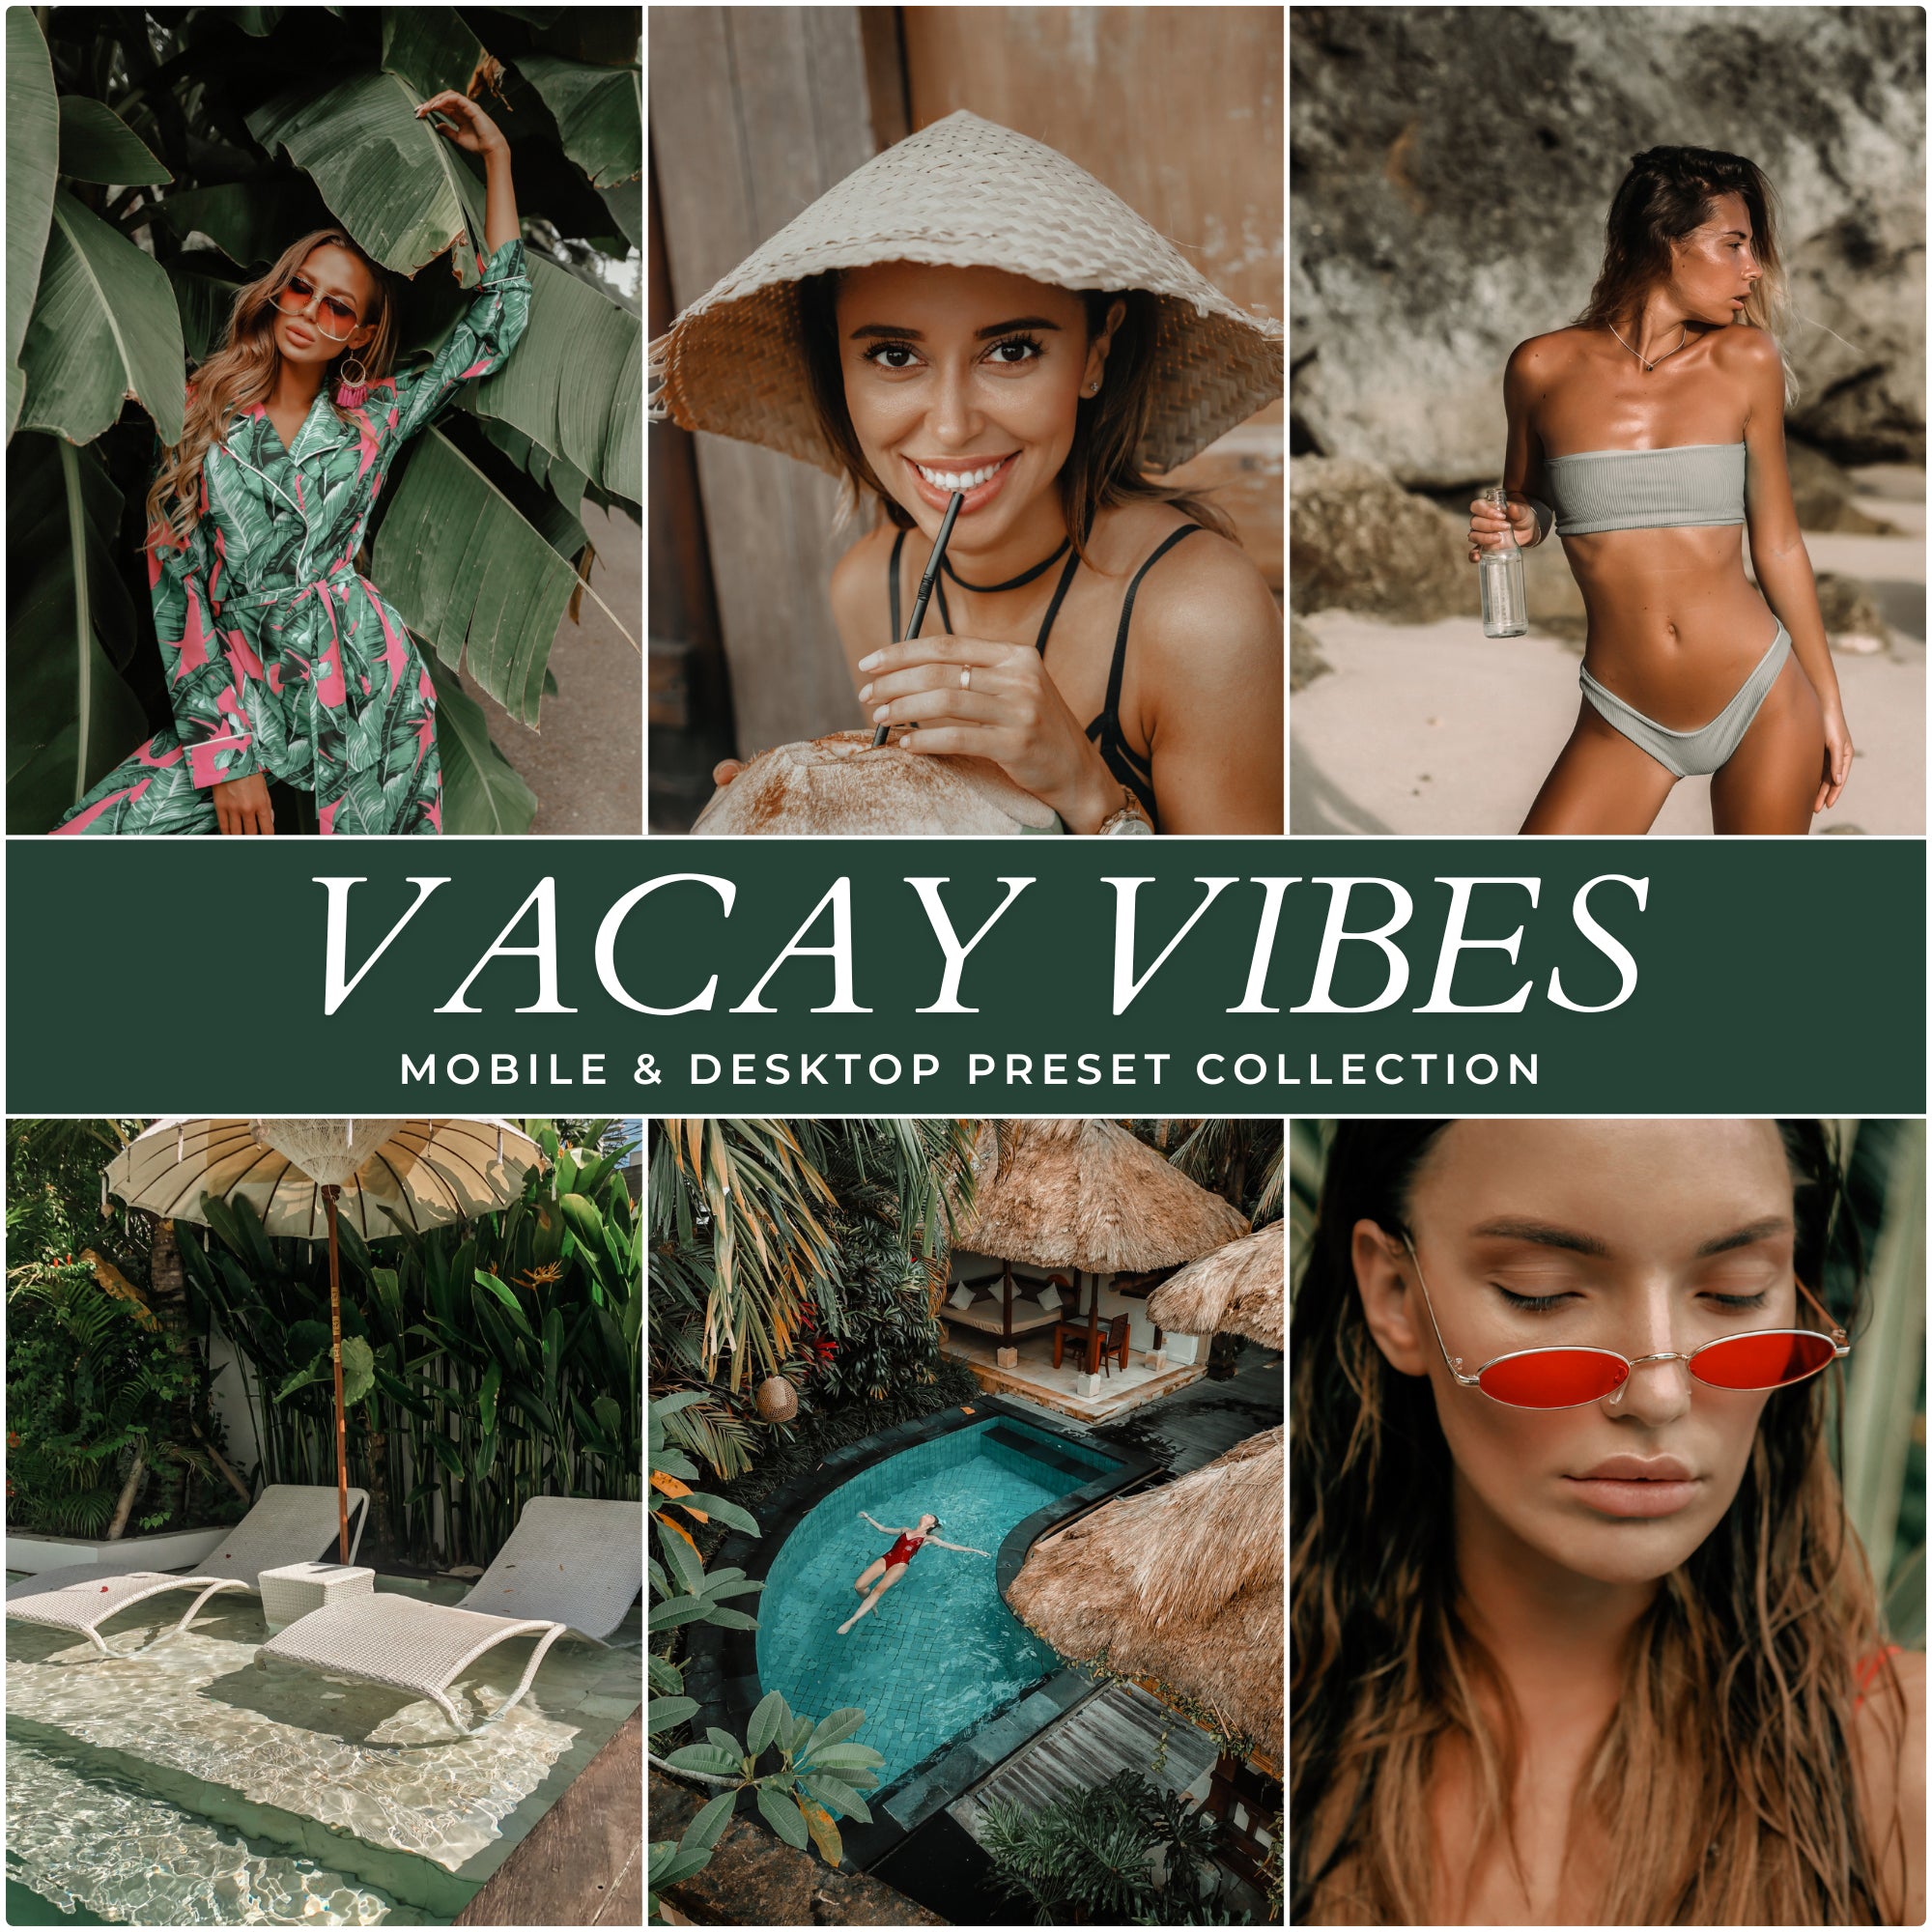 Vacay Moody Lightroom Presets For Photographers and Instagram Influencers Photo Editing In Adobe Lightroom By Lou And Marks Presets